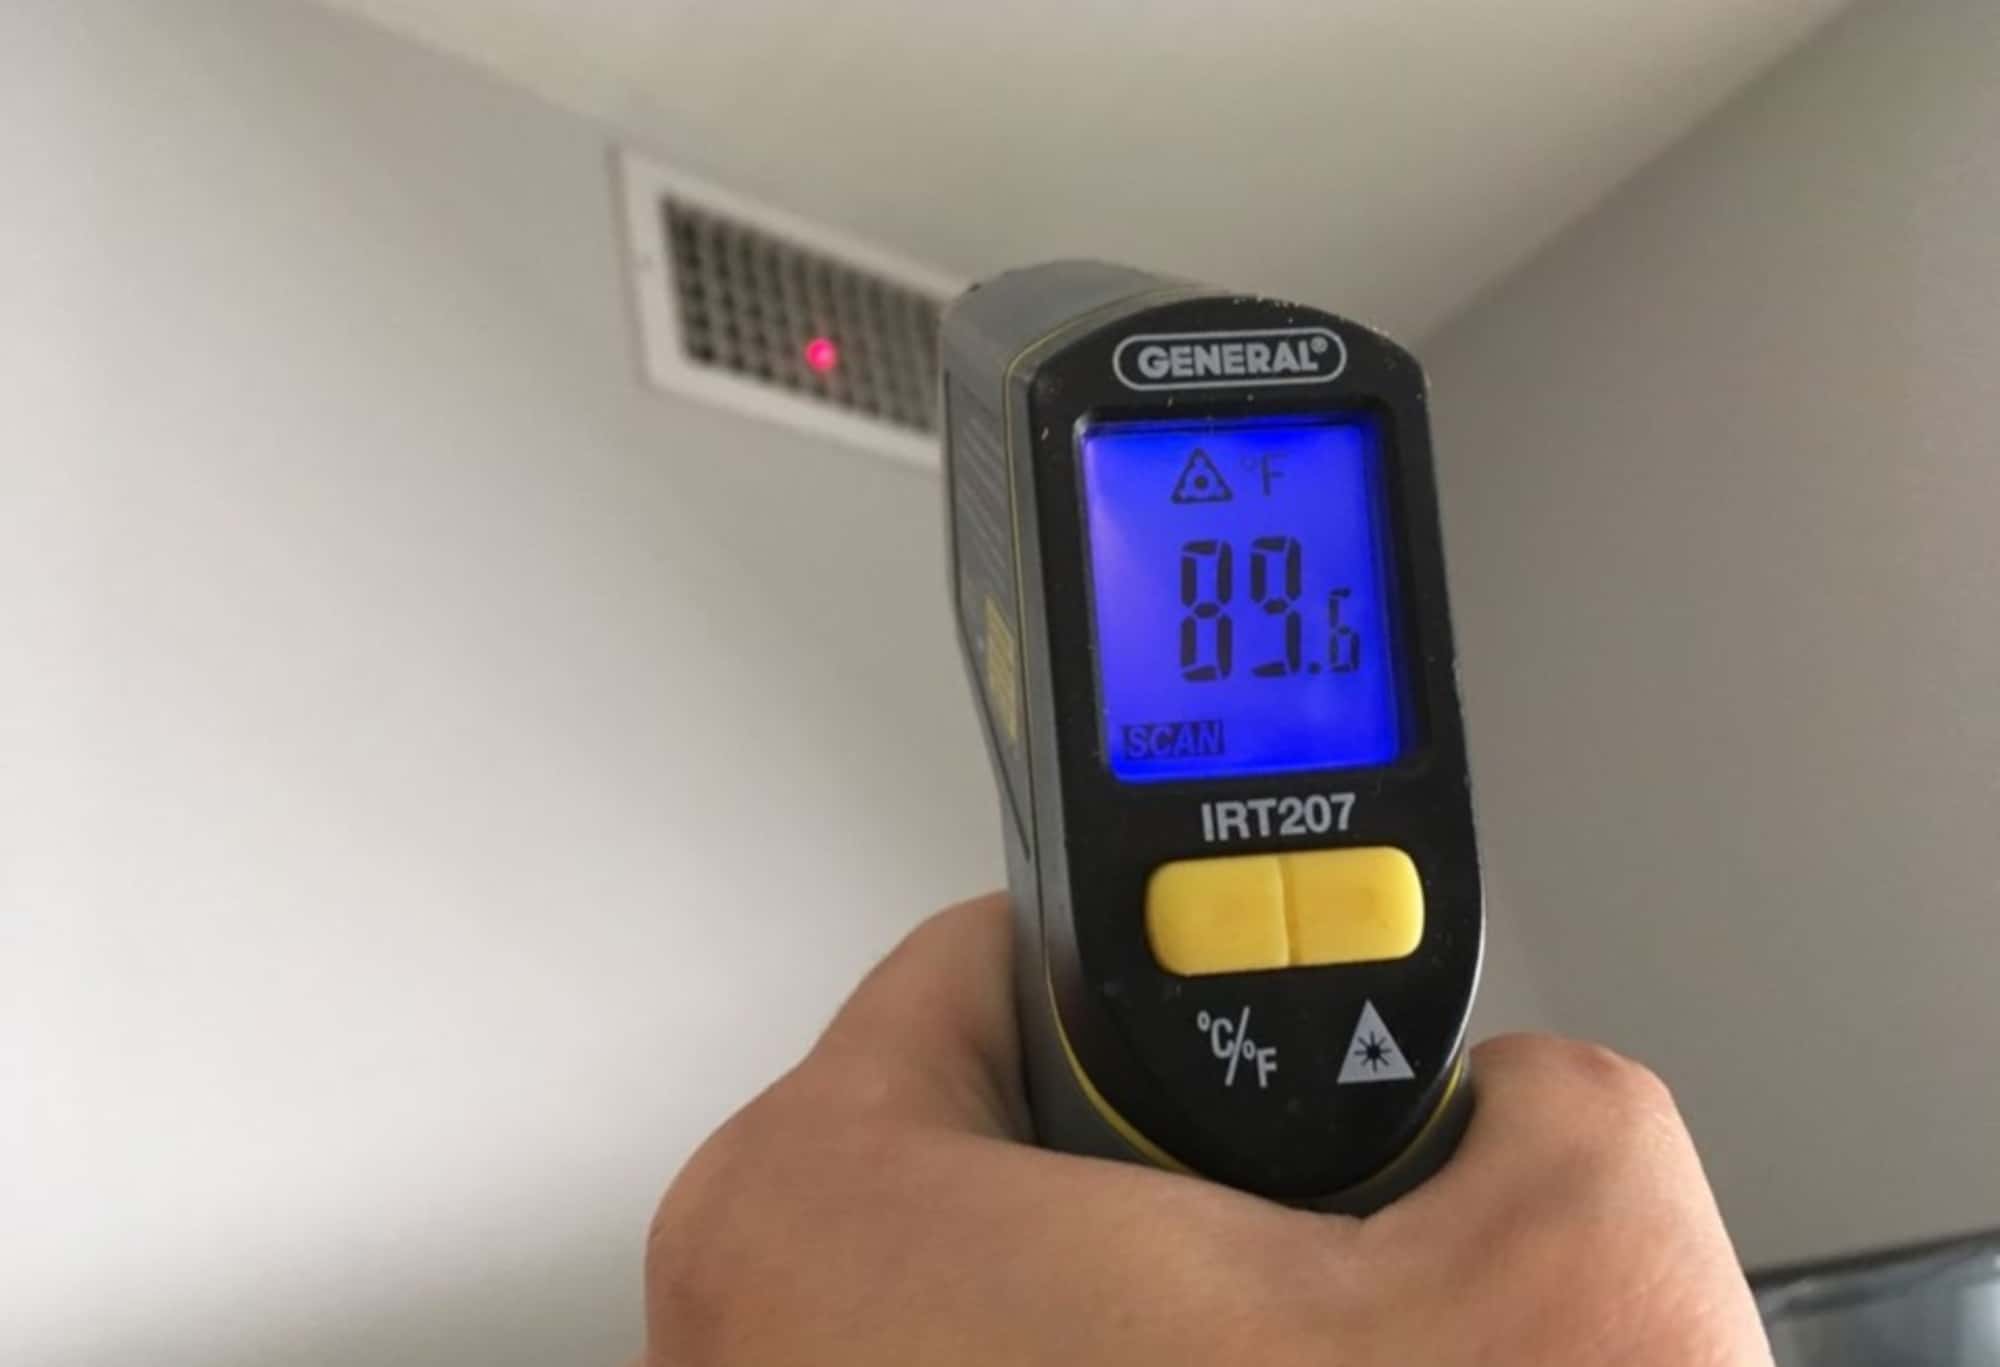 HVAC preventative maintenance performed by a certified HVAC technician using an infrared thermometer to test the temperature of air coming from a duct.